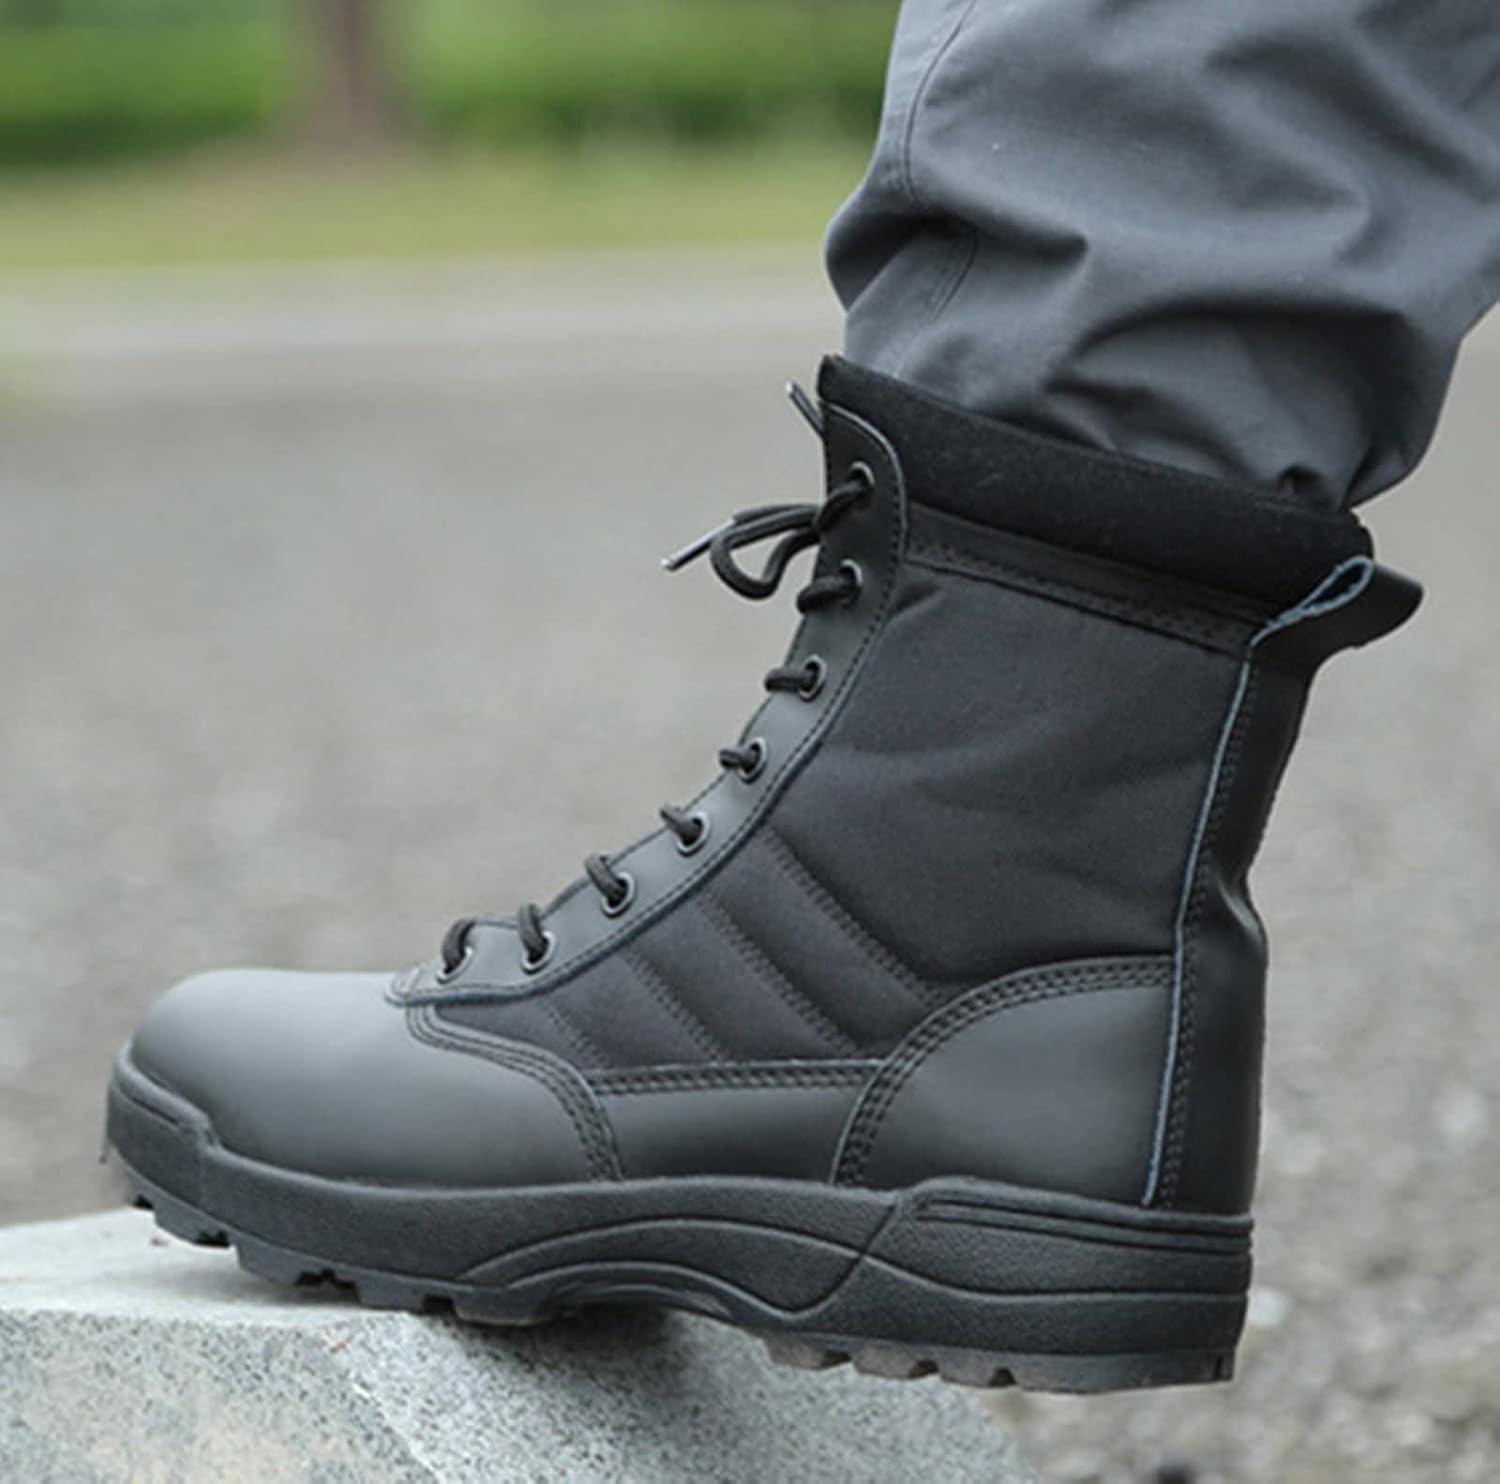 QMFUR Mens Military Boots Outdoor Hiking Boots Work Boots Tactical